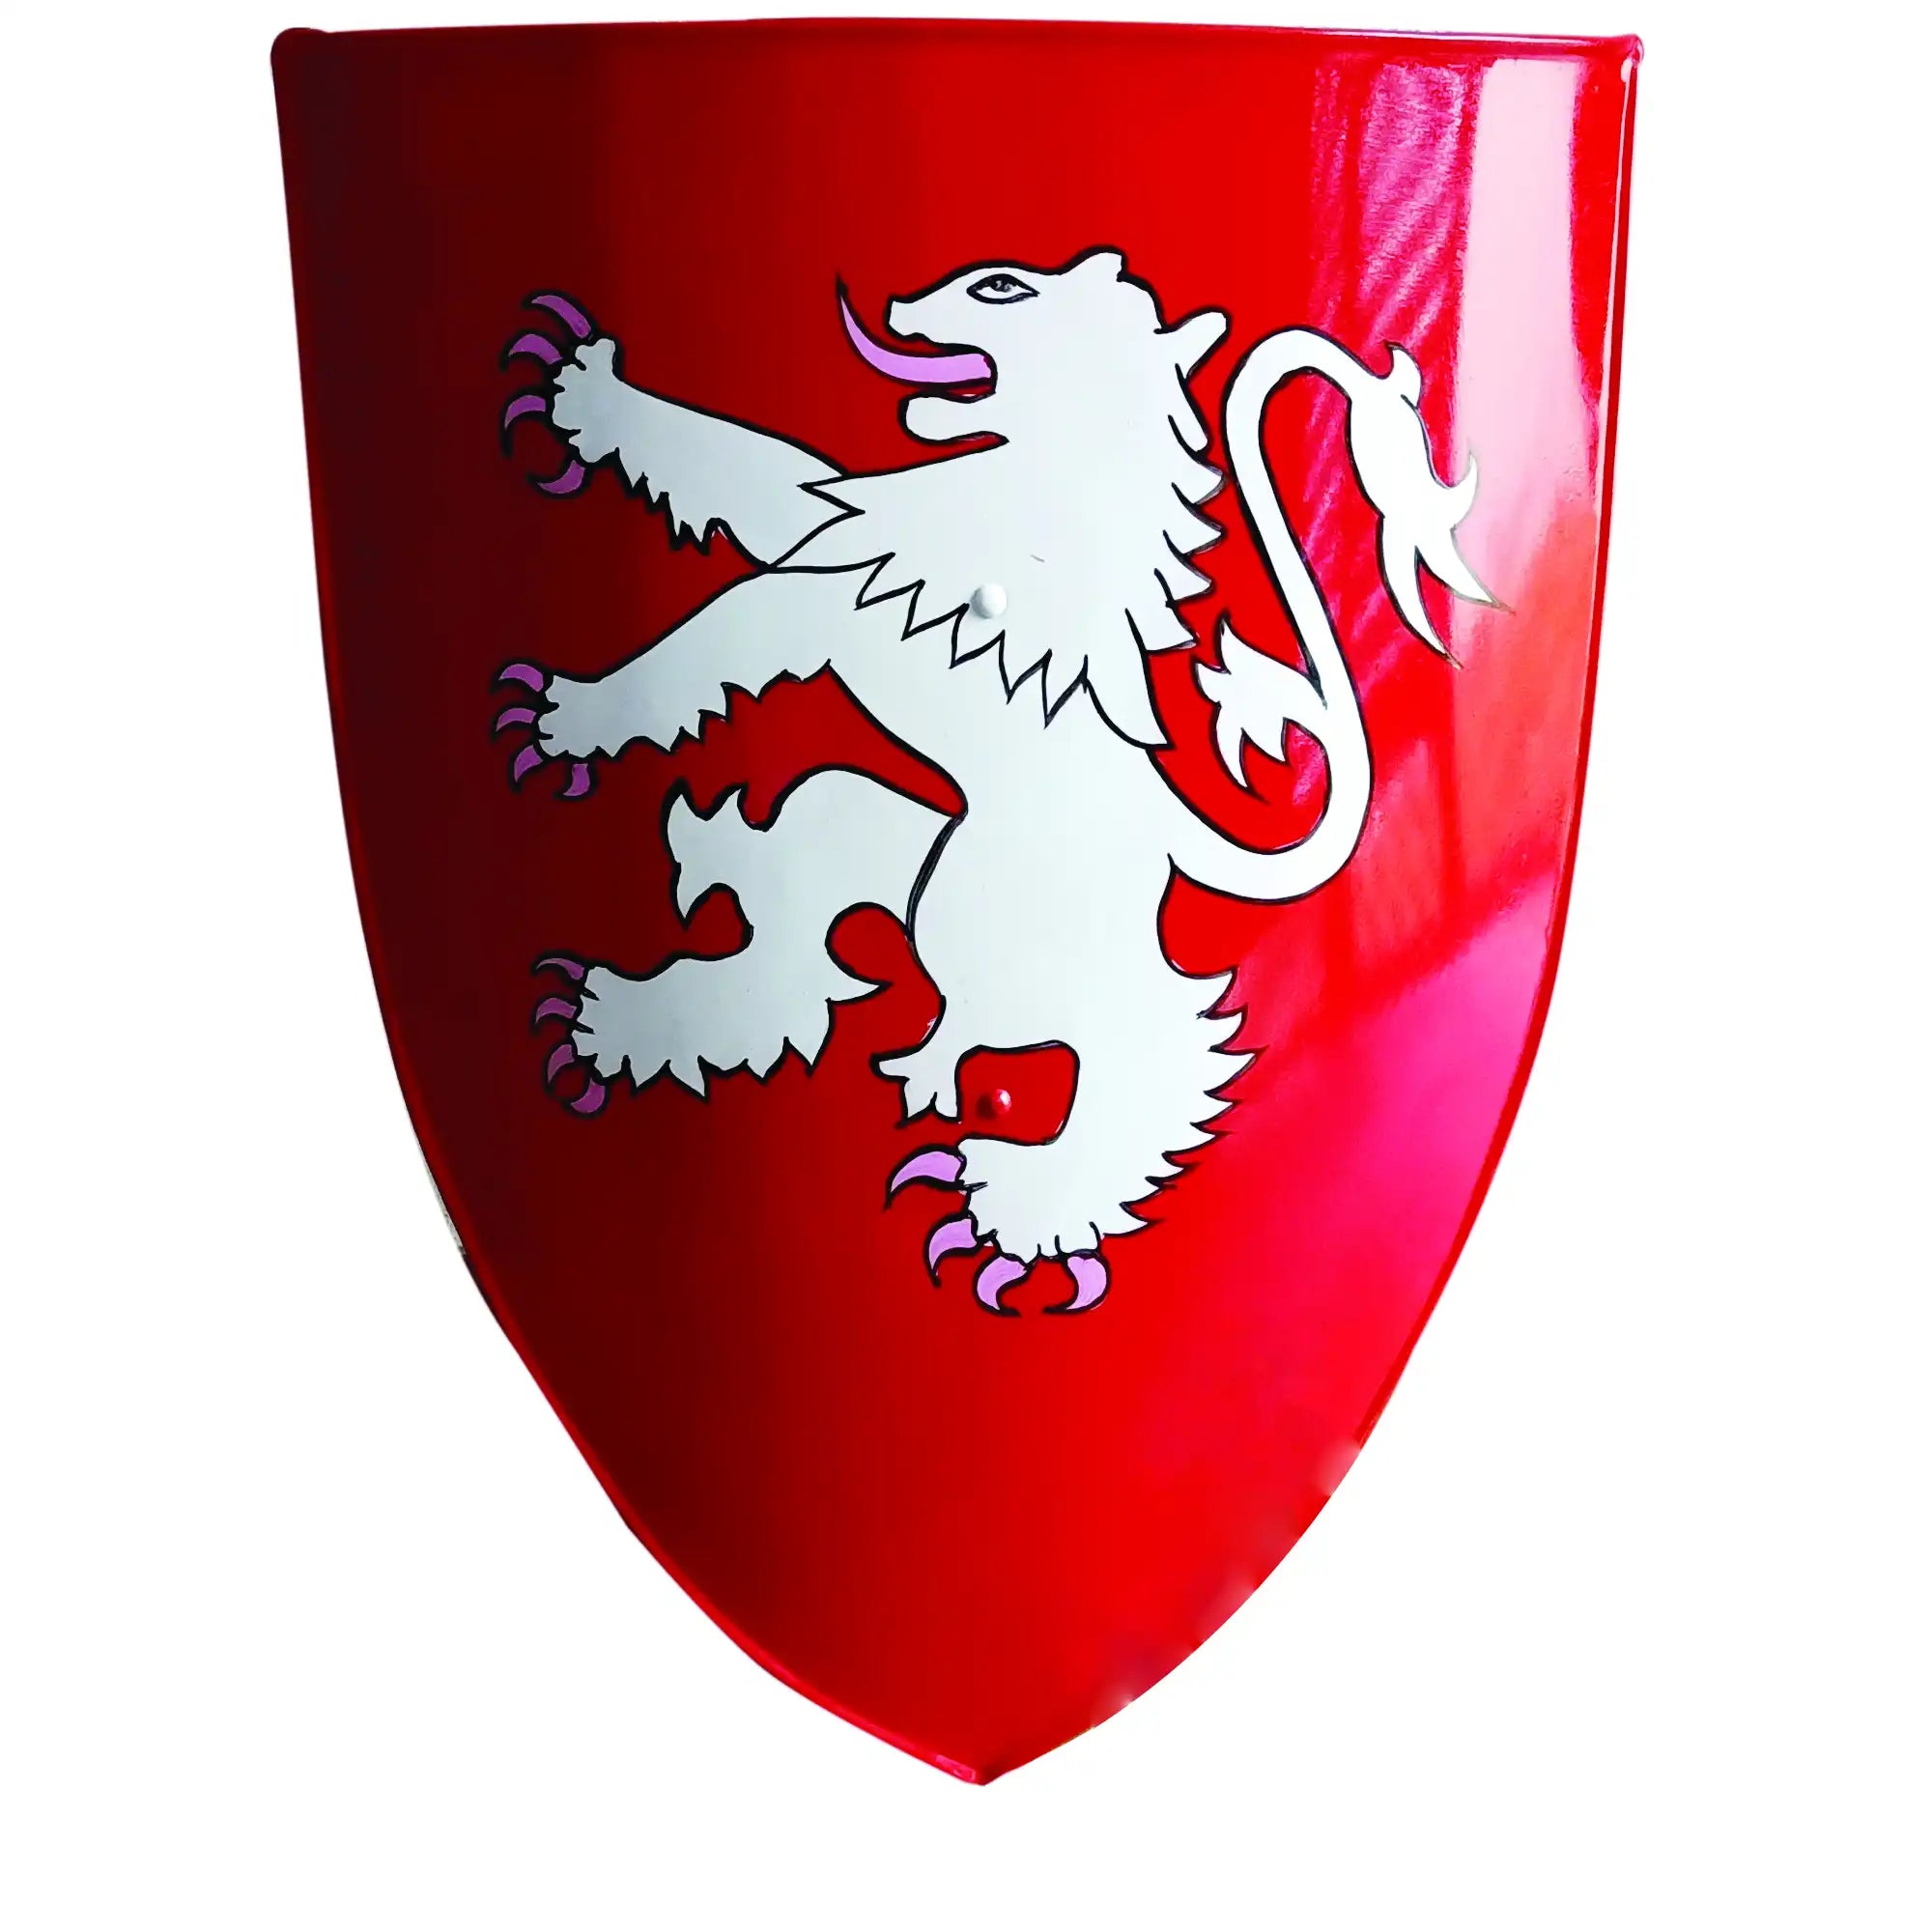 Red and White Leonine Heater Medieval Knight Shield